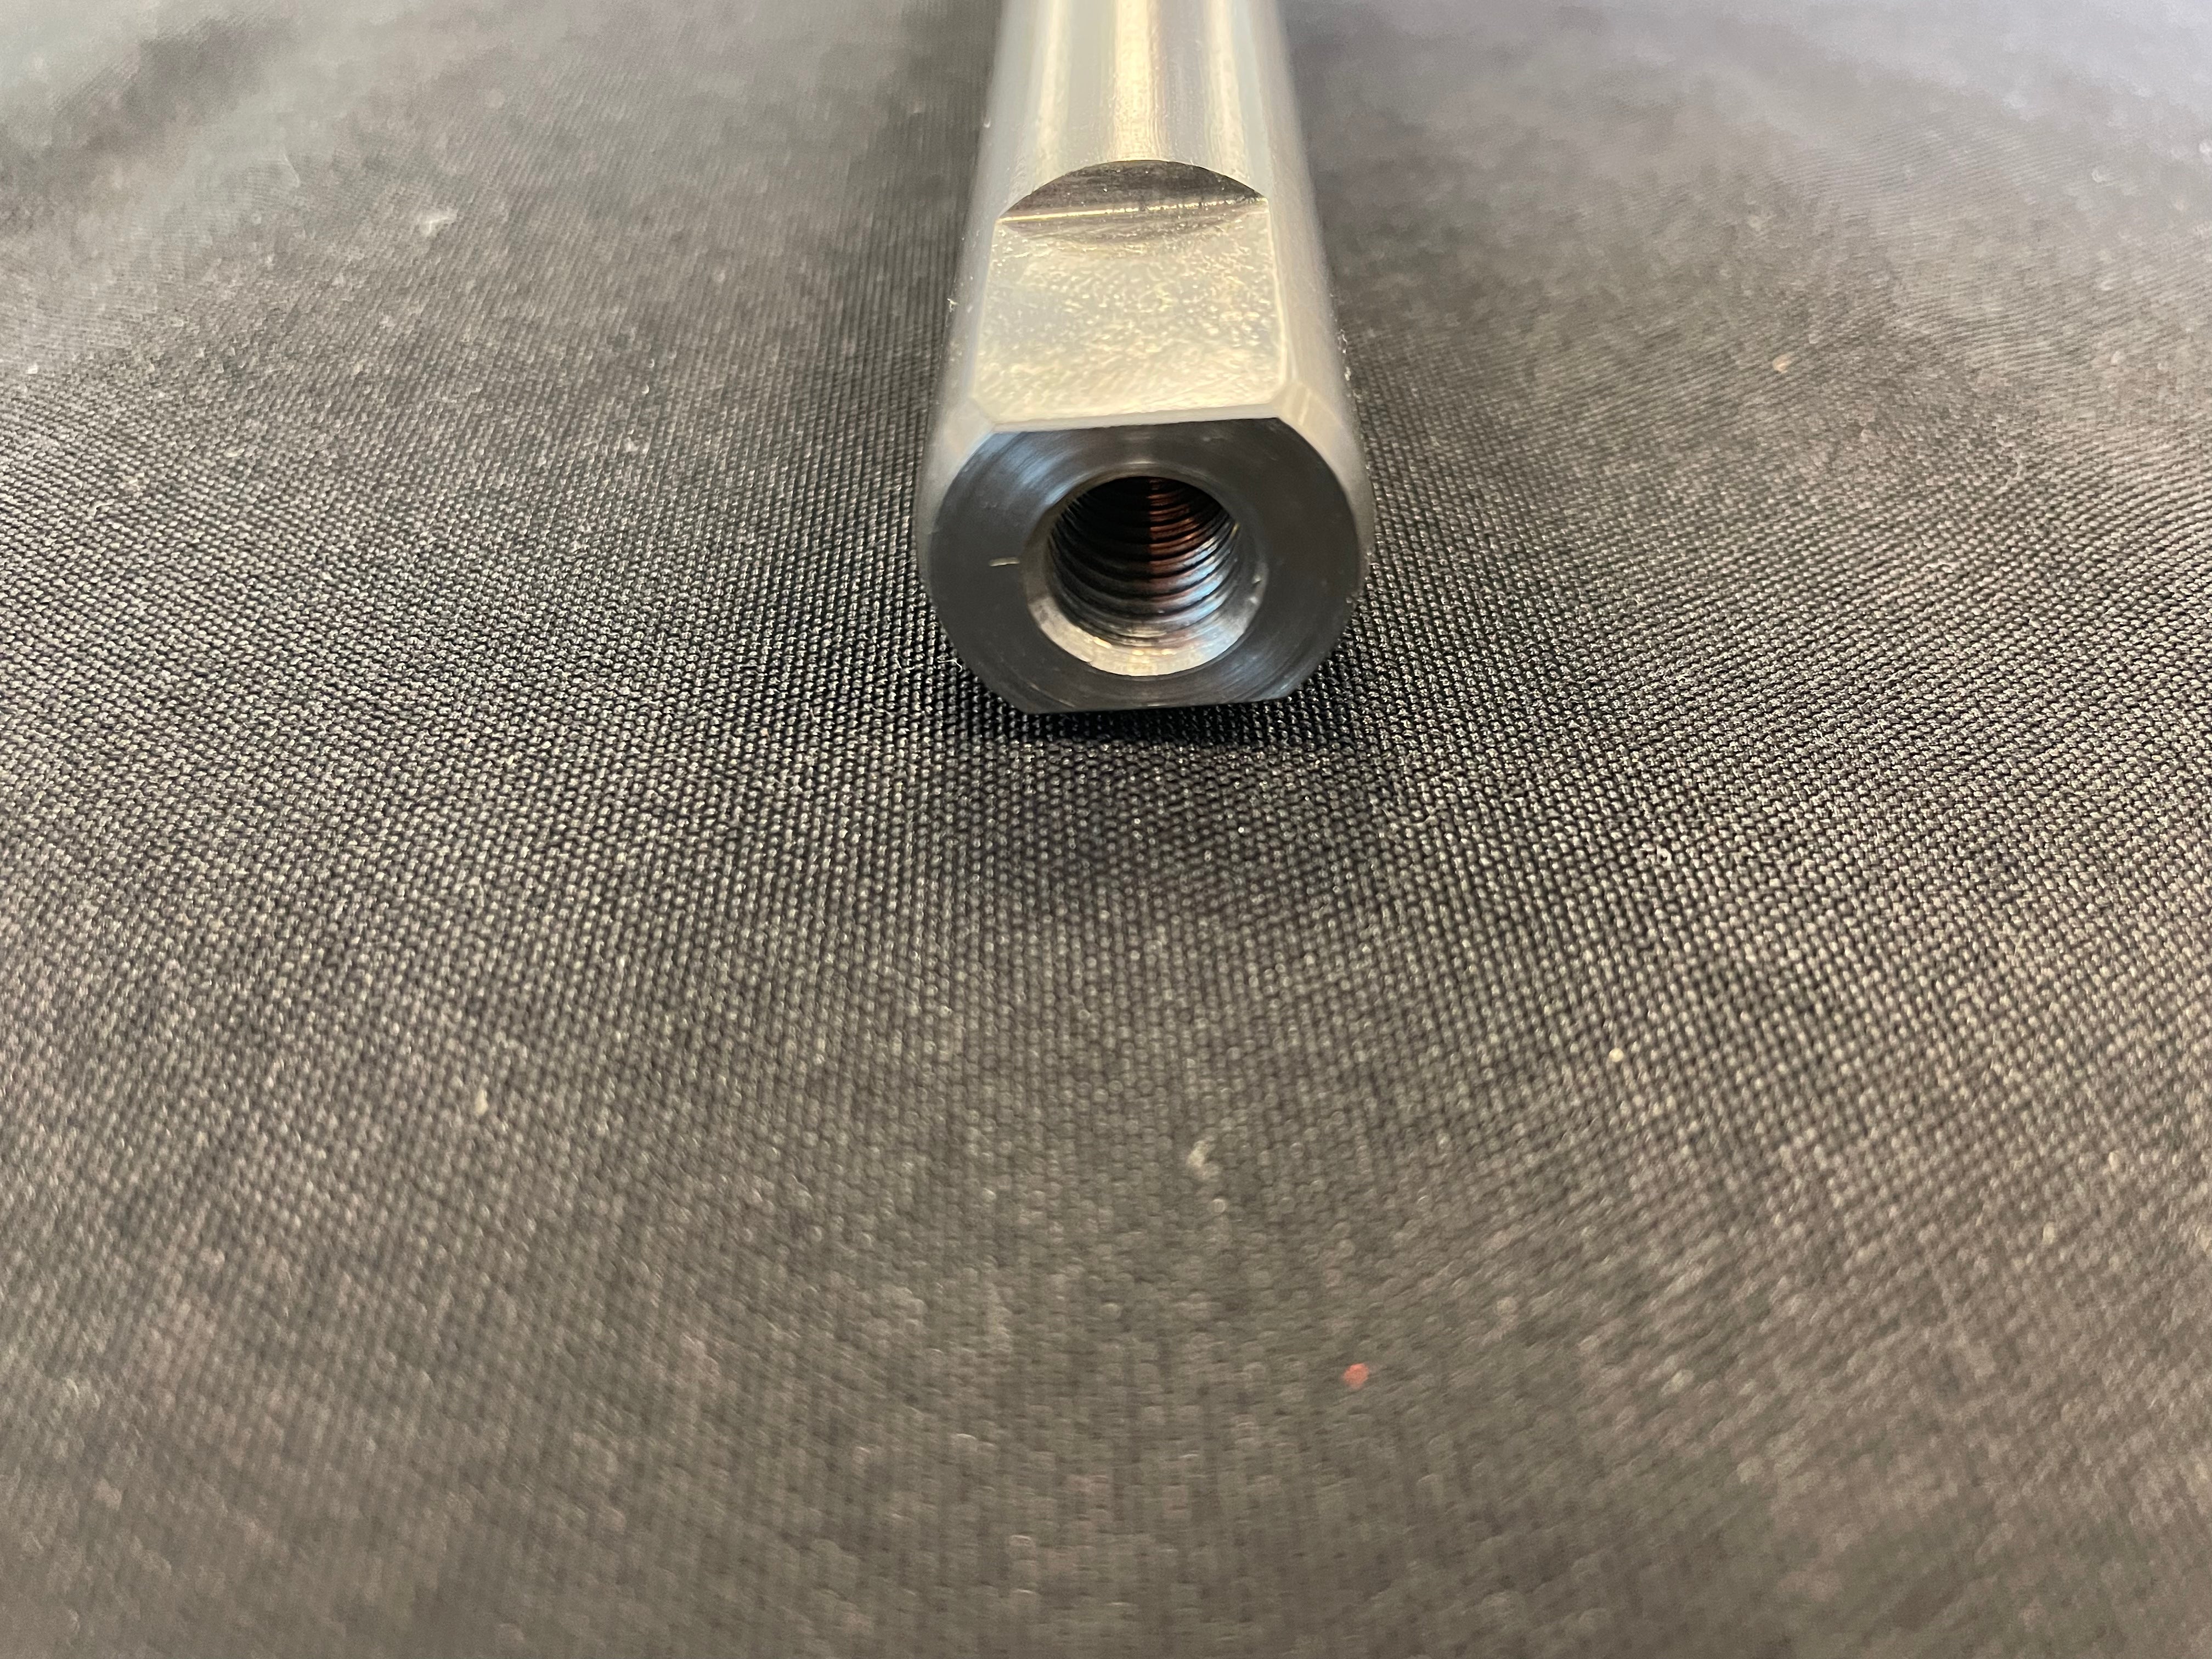 Precision Shaft for Template in Bosch